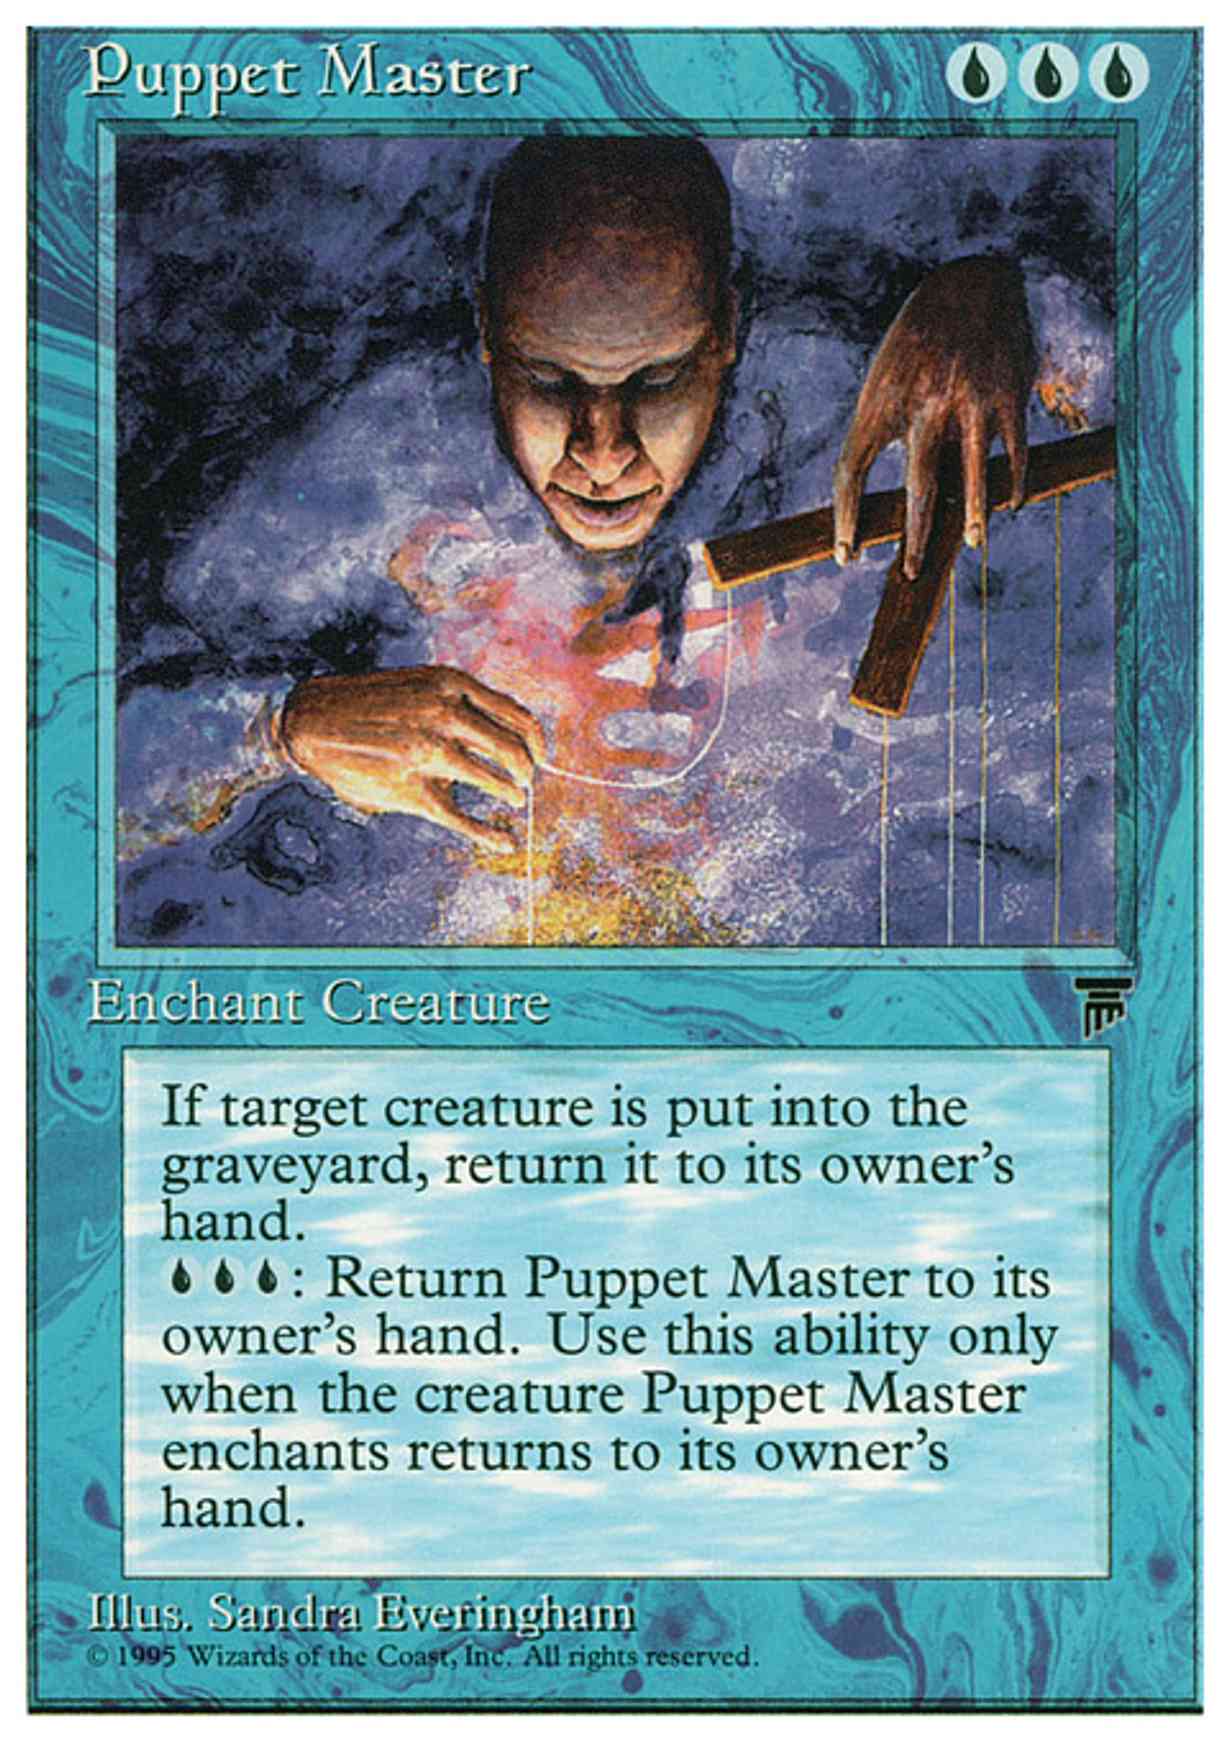 Puppet Master magic card front